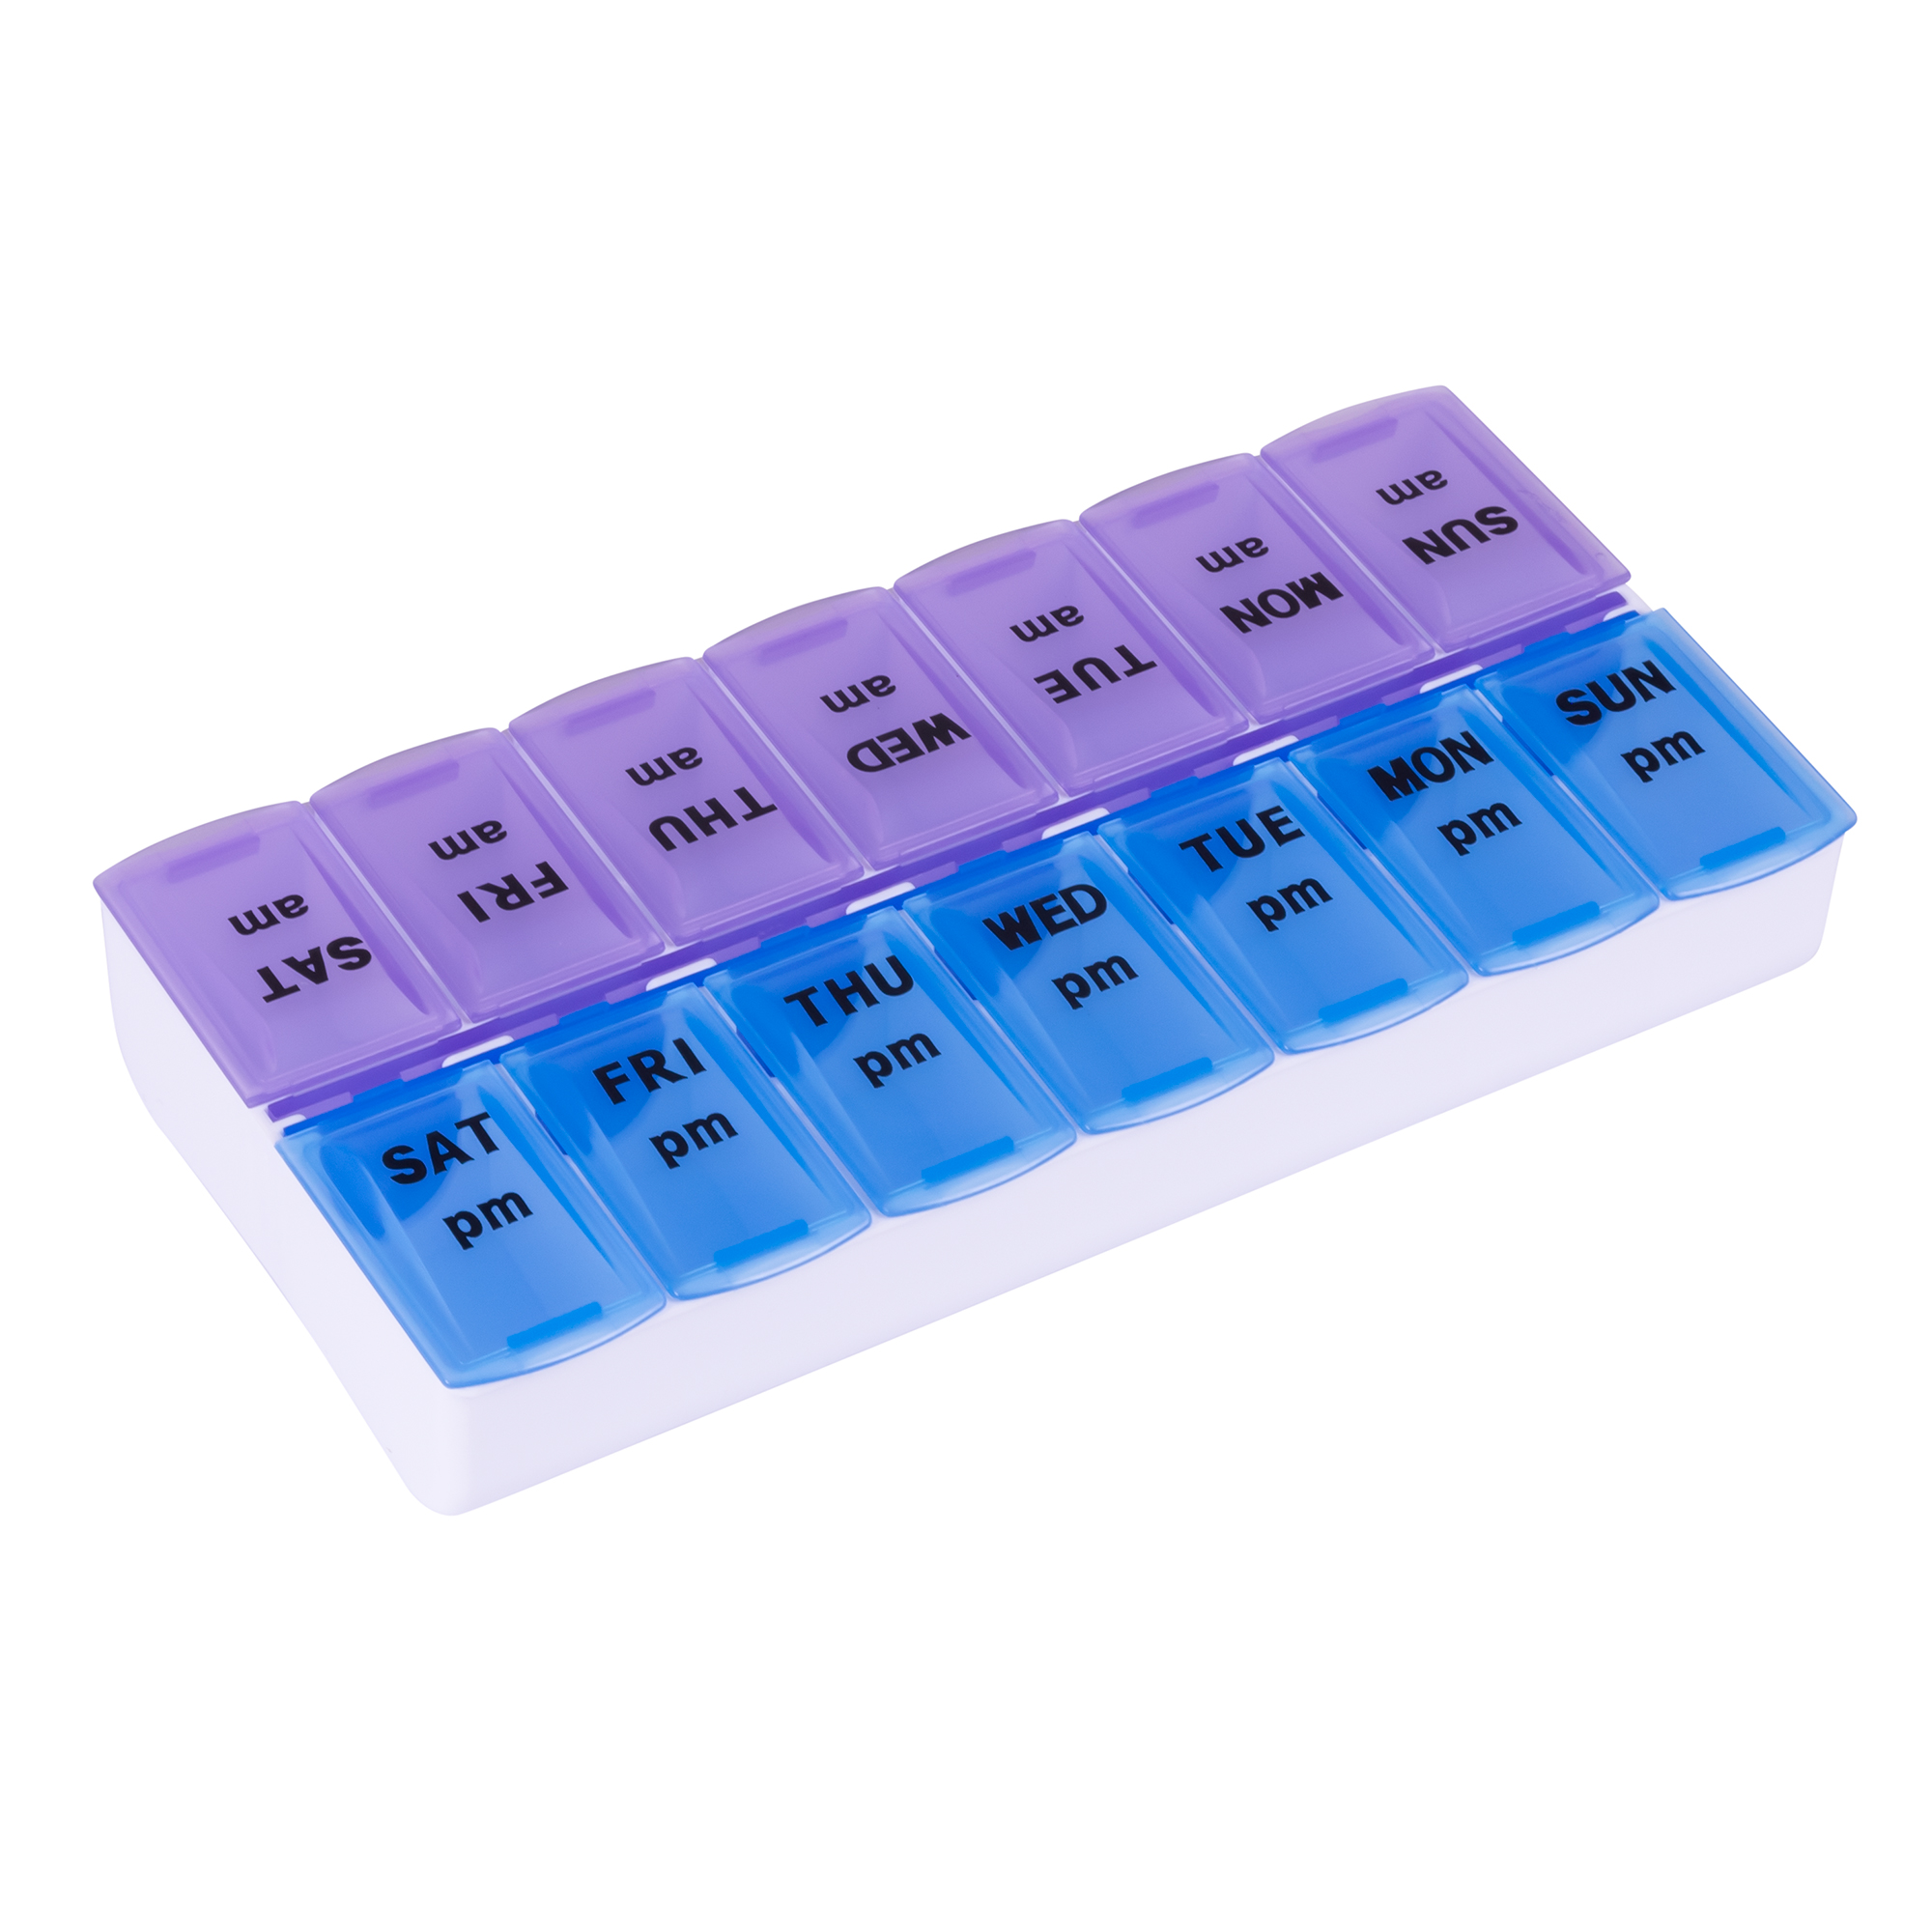 Carex Apex Twice-a-Day (AM/PM) Plastic Weekly Pill/Medicine Organizer with See-Through Lids - image 1 of 6